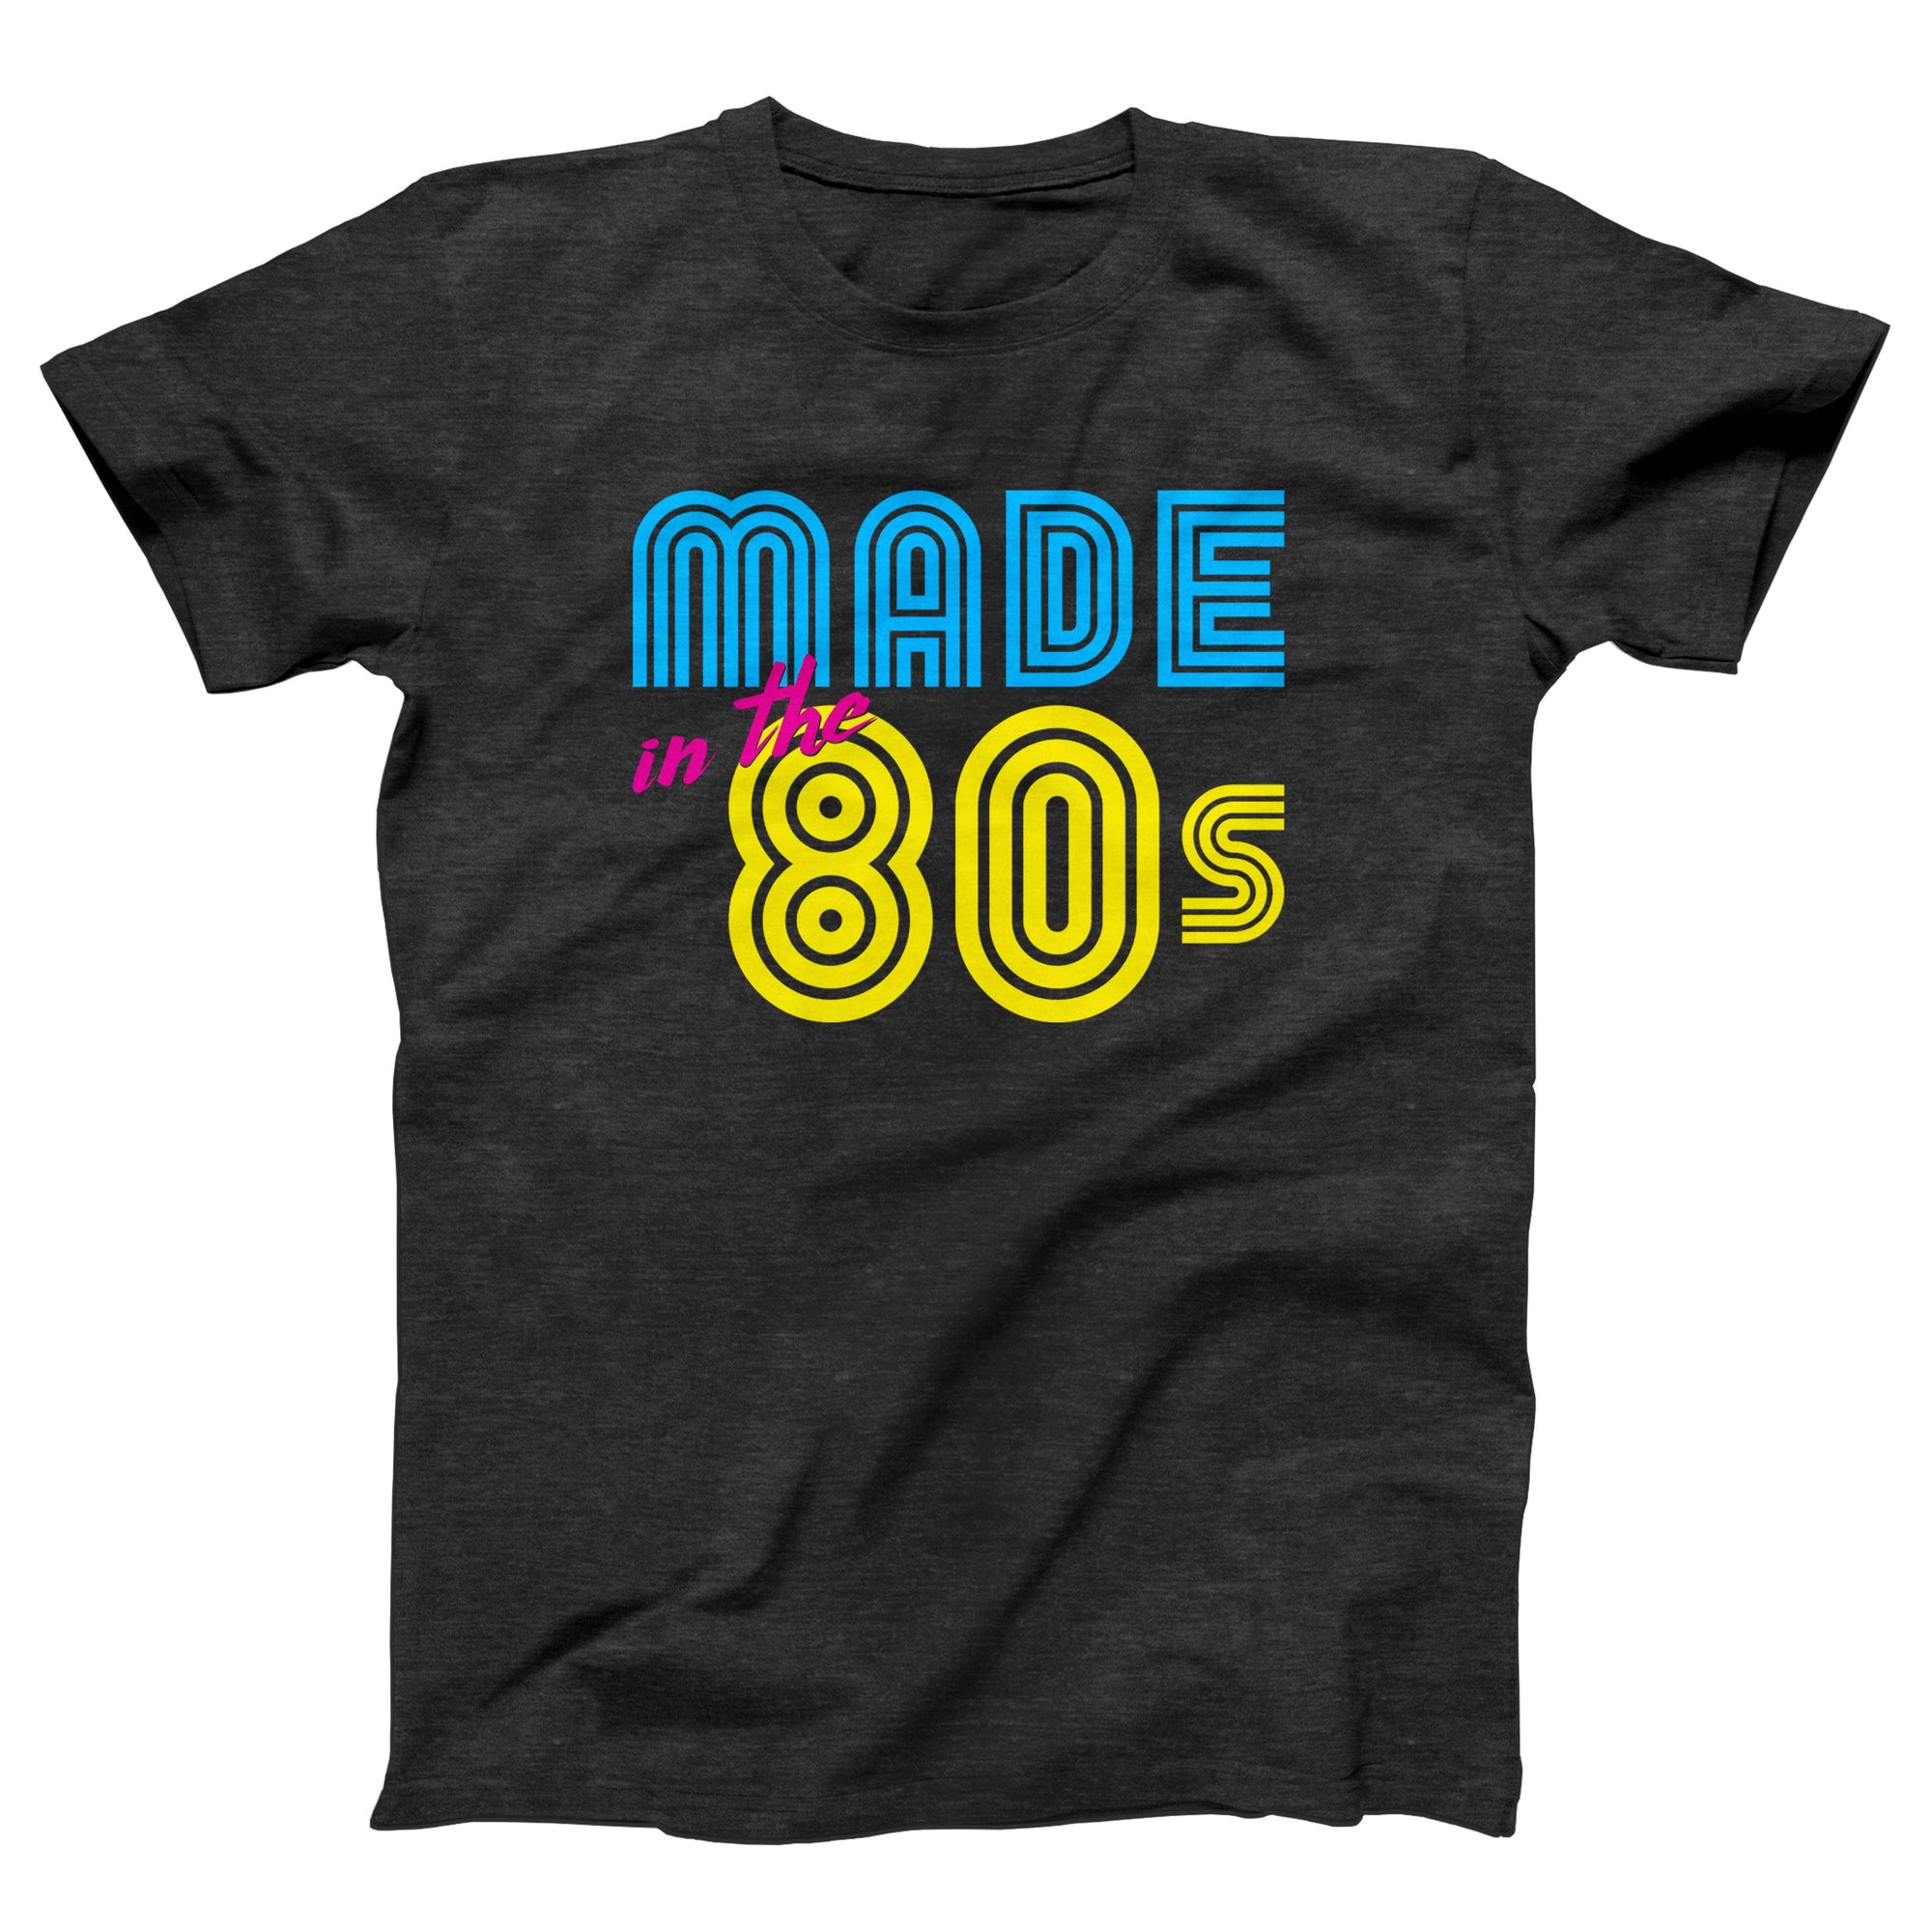 Made in the 80s Adult Unisex T-Shirt - anishphilip